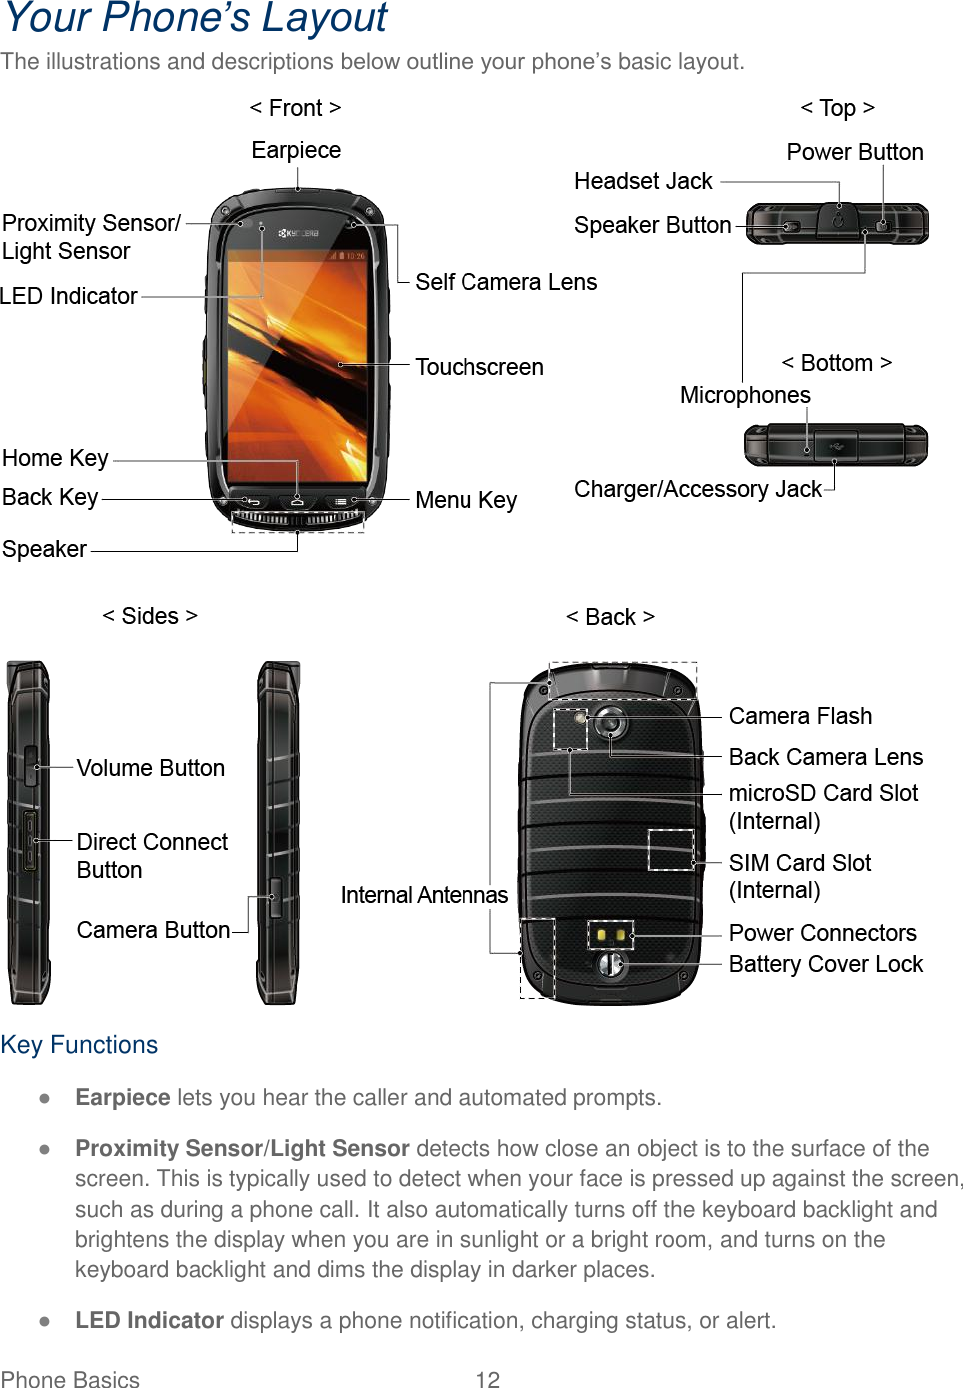 Phone Basics  12   Your Phone’s Layout The illustrations and descriptions below outline your phone’s basic layout.  Key Functions ● Earpiece lets you hear the caller and automated prompts. ● Proximity Sensor/Light Sensor detects how close an object is to the surface of the screen. This is typically used to detect when your face is pressed up against the screen, such as during a phone call. It also automatically turns off the keyboard backlight and brightens the display when you are in sunlight or a bright room, and turns on the keyboard backlight and dims the display in darker places. ● LED Indicator displays a phone notification, charging status, or alert. 